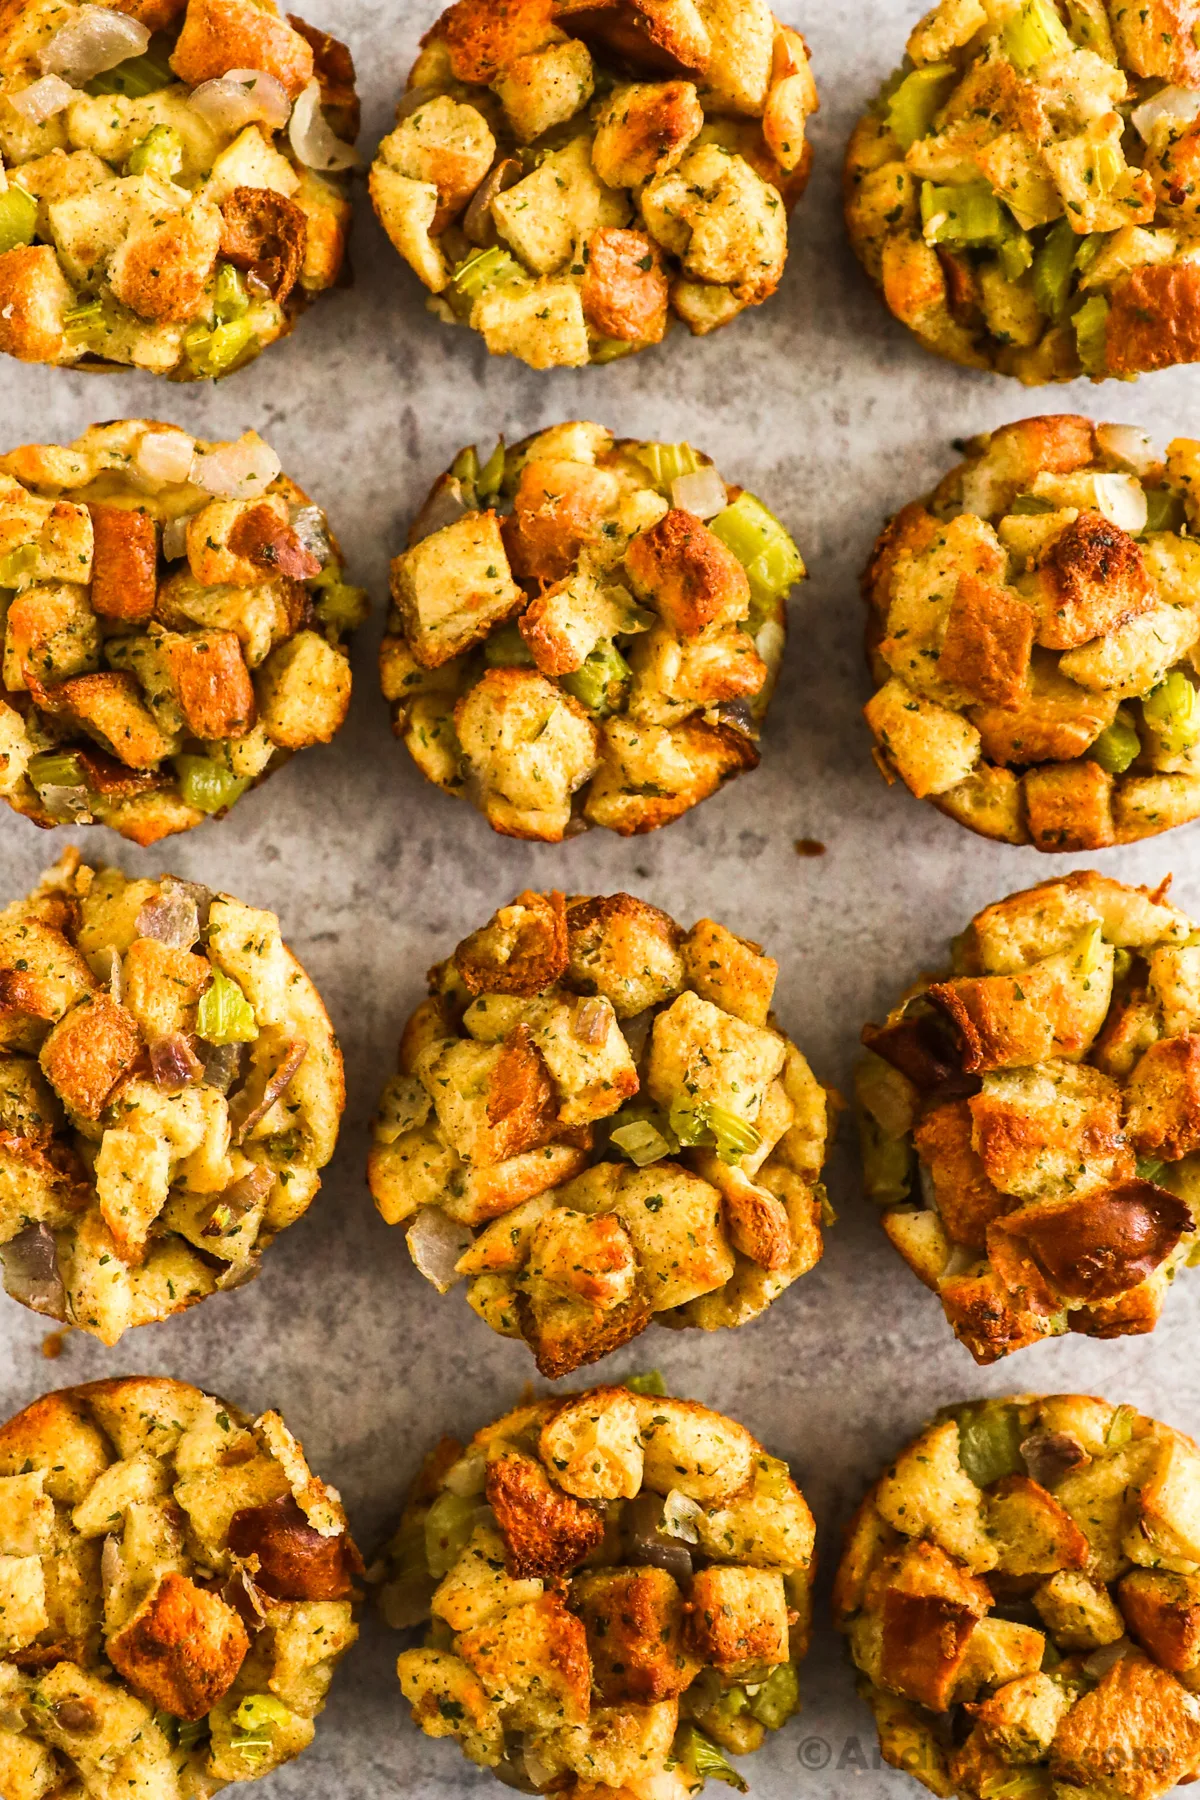 Looking down at cooked stuffing muffins on a counter.